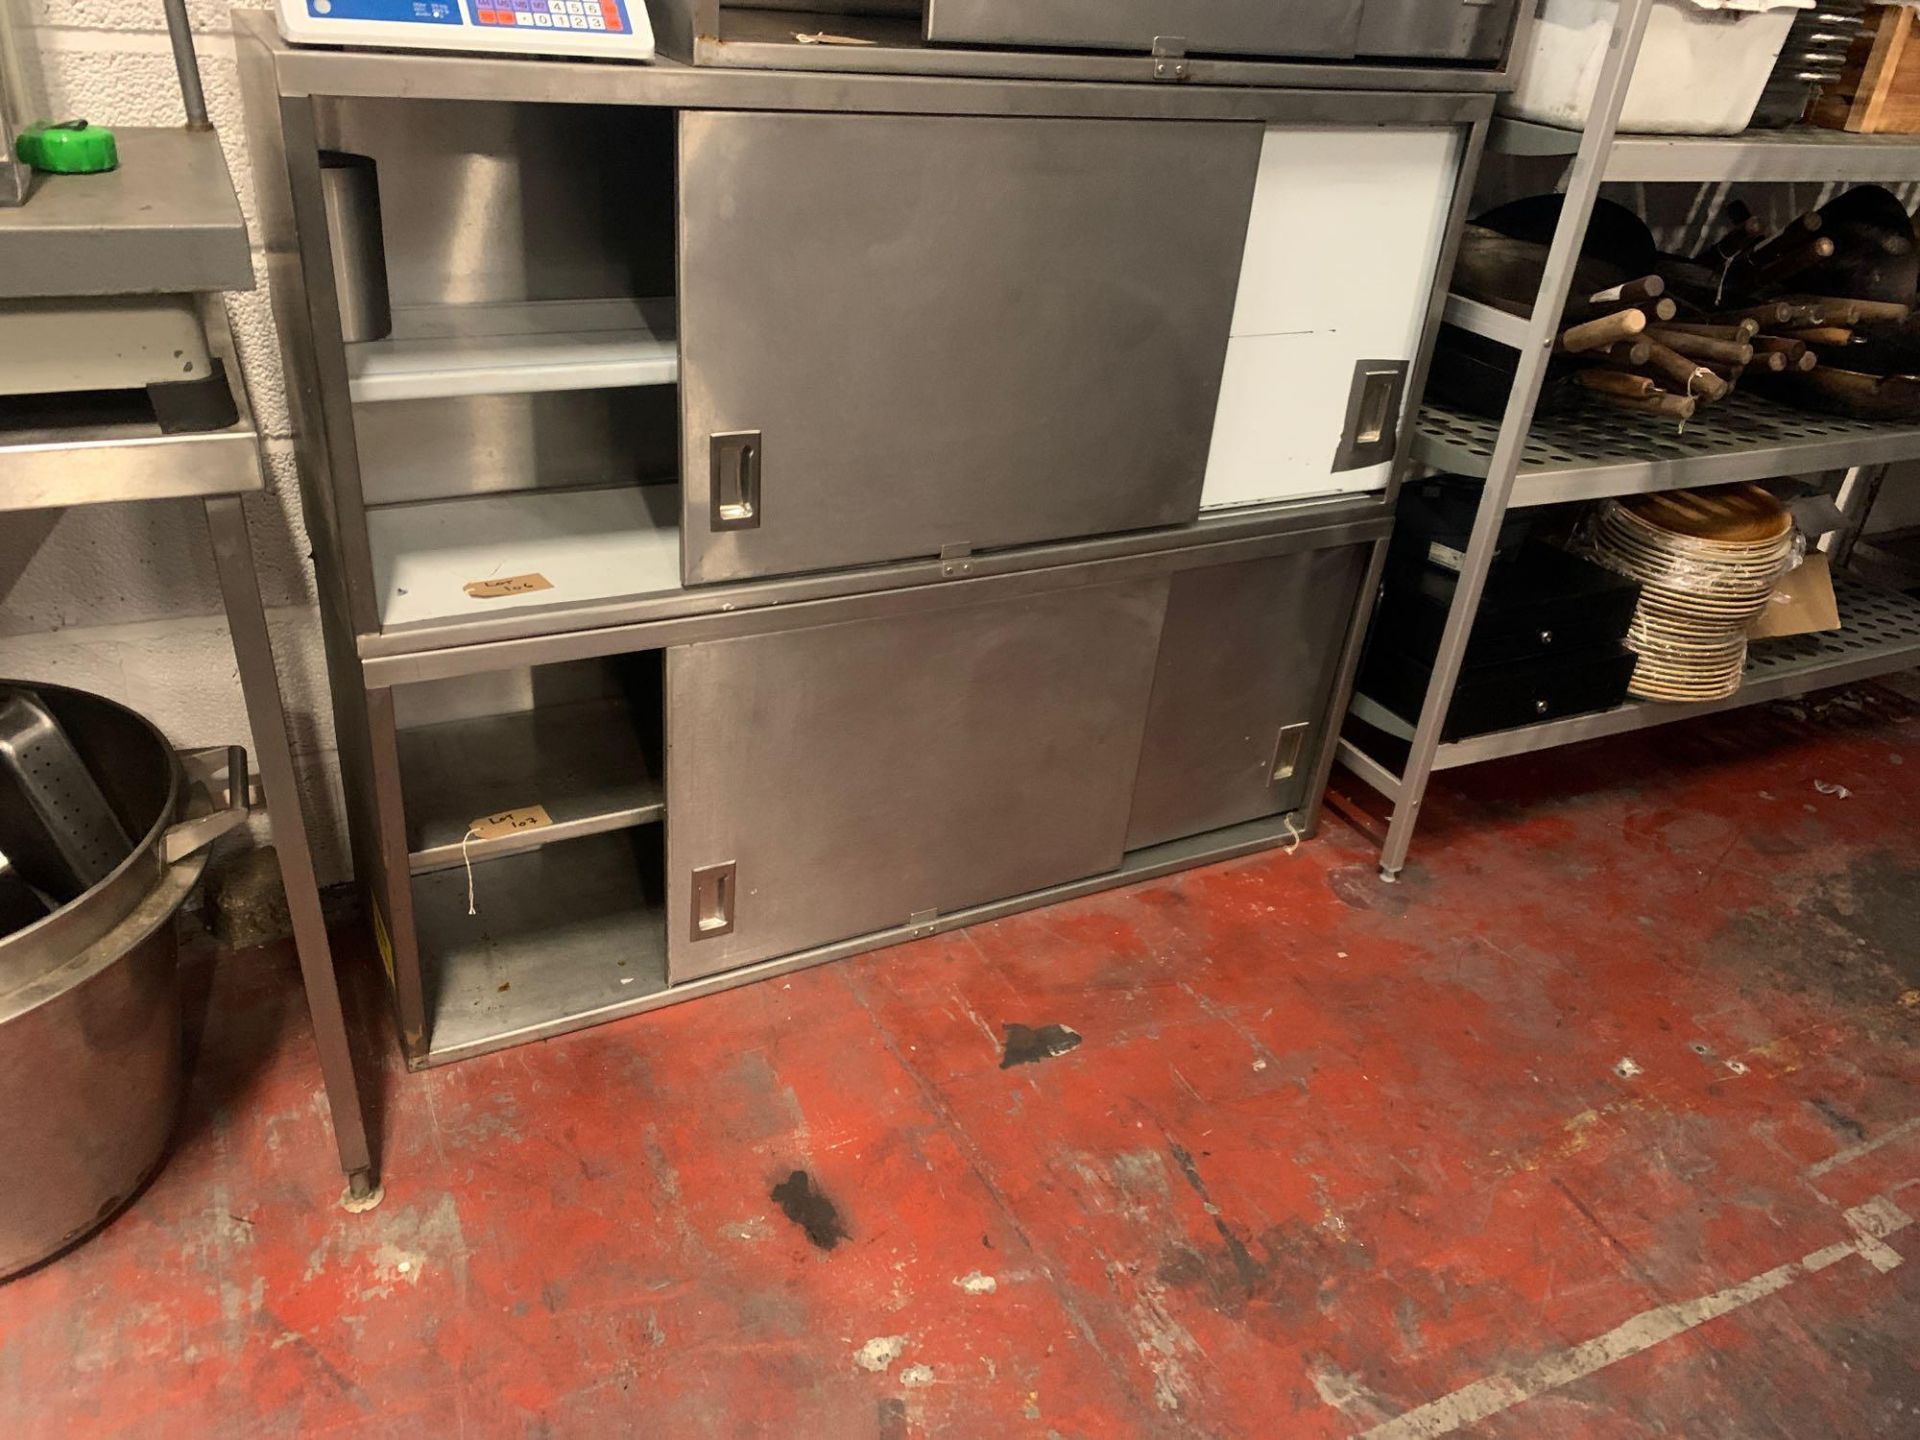 Stainless steel commercial kitchen wall cabinet 150cm x 40cm x 60cm - Image 2 of 3